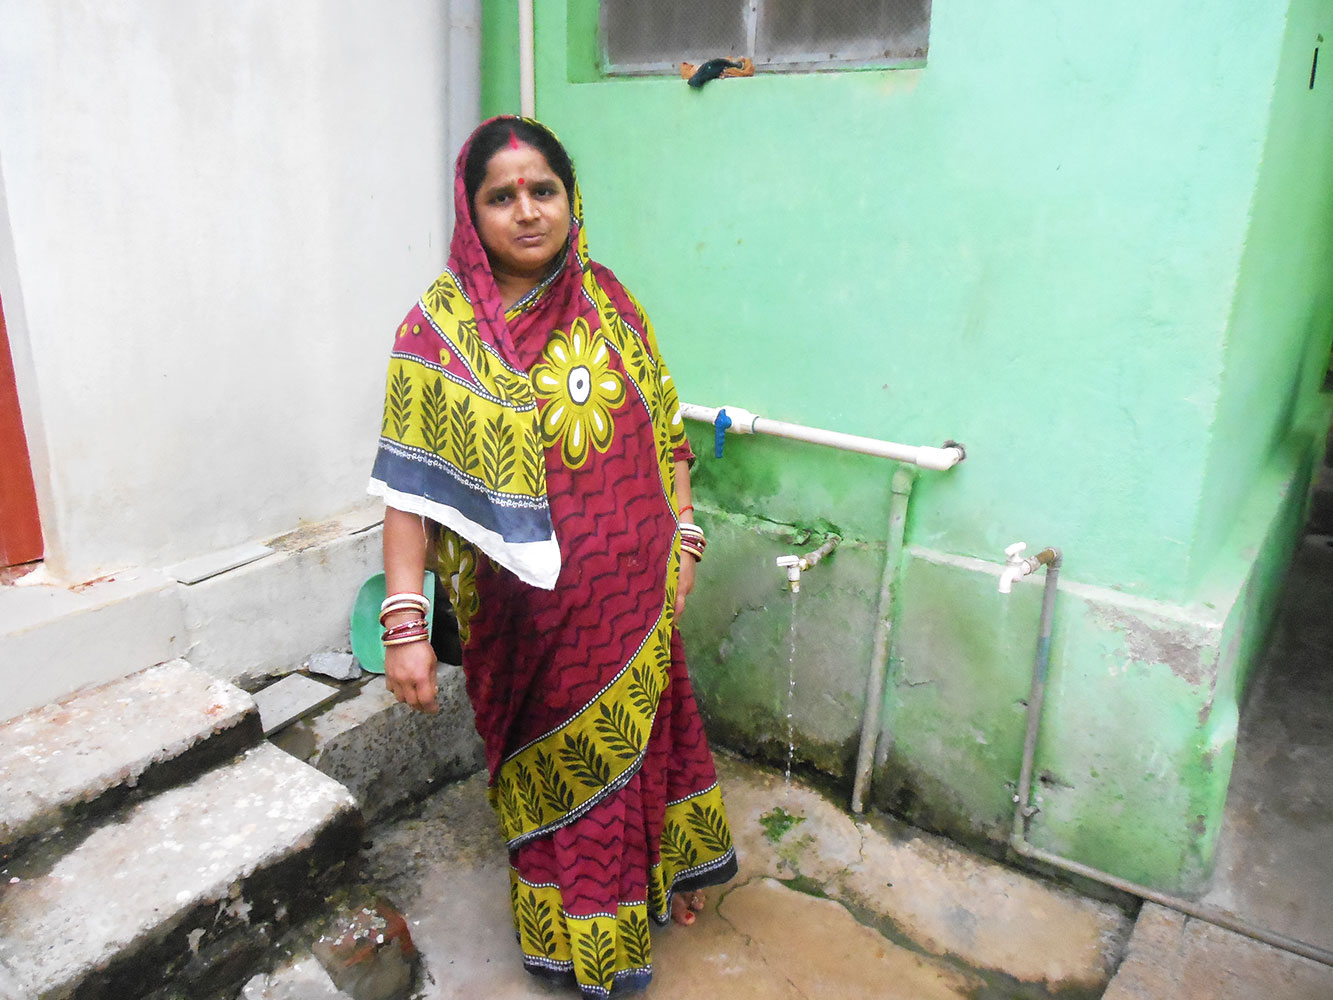 Piped water & Toilet to rural houses…. Living with dignity